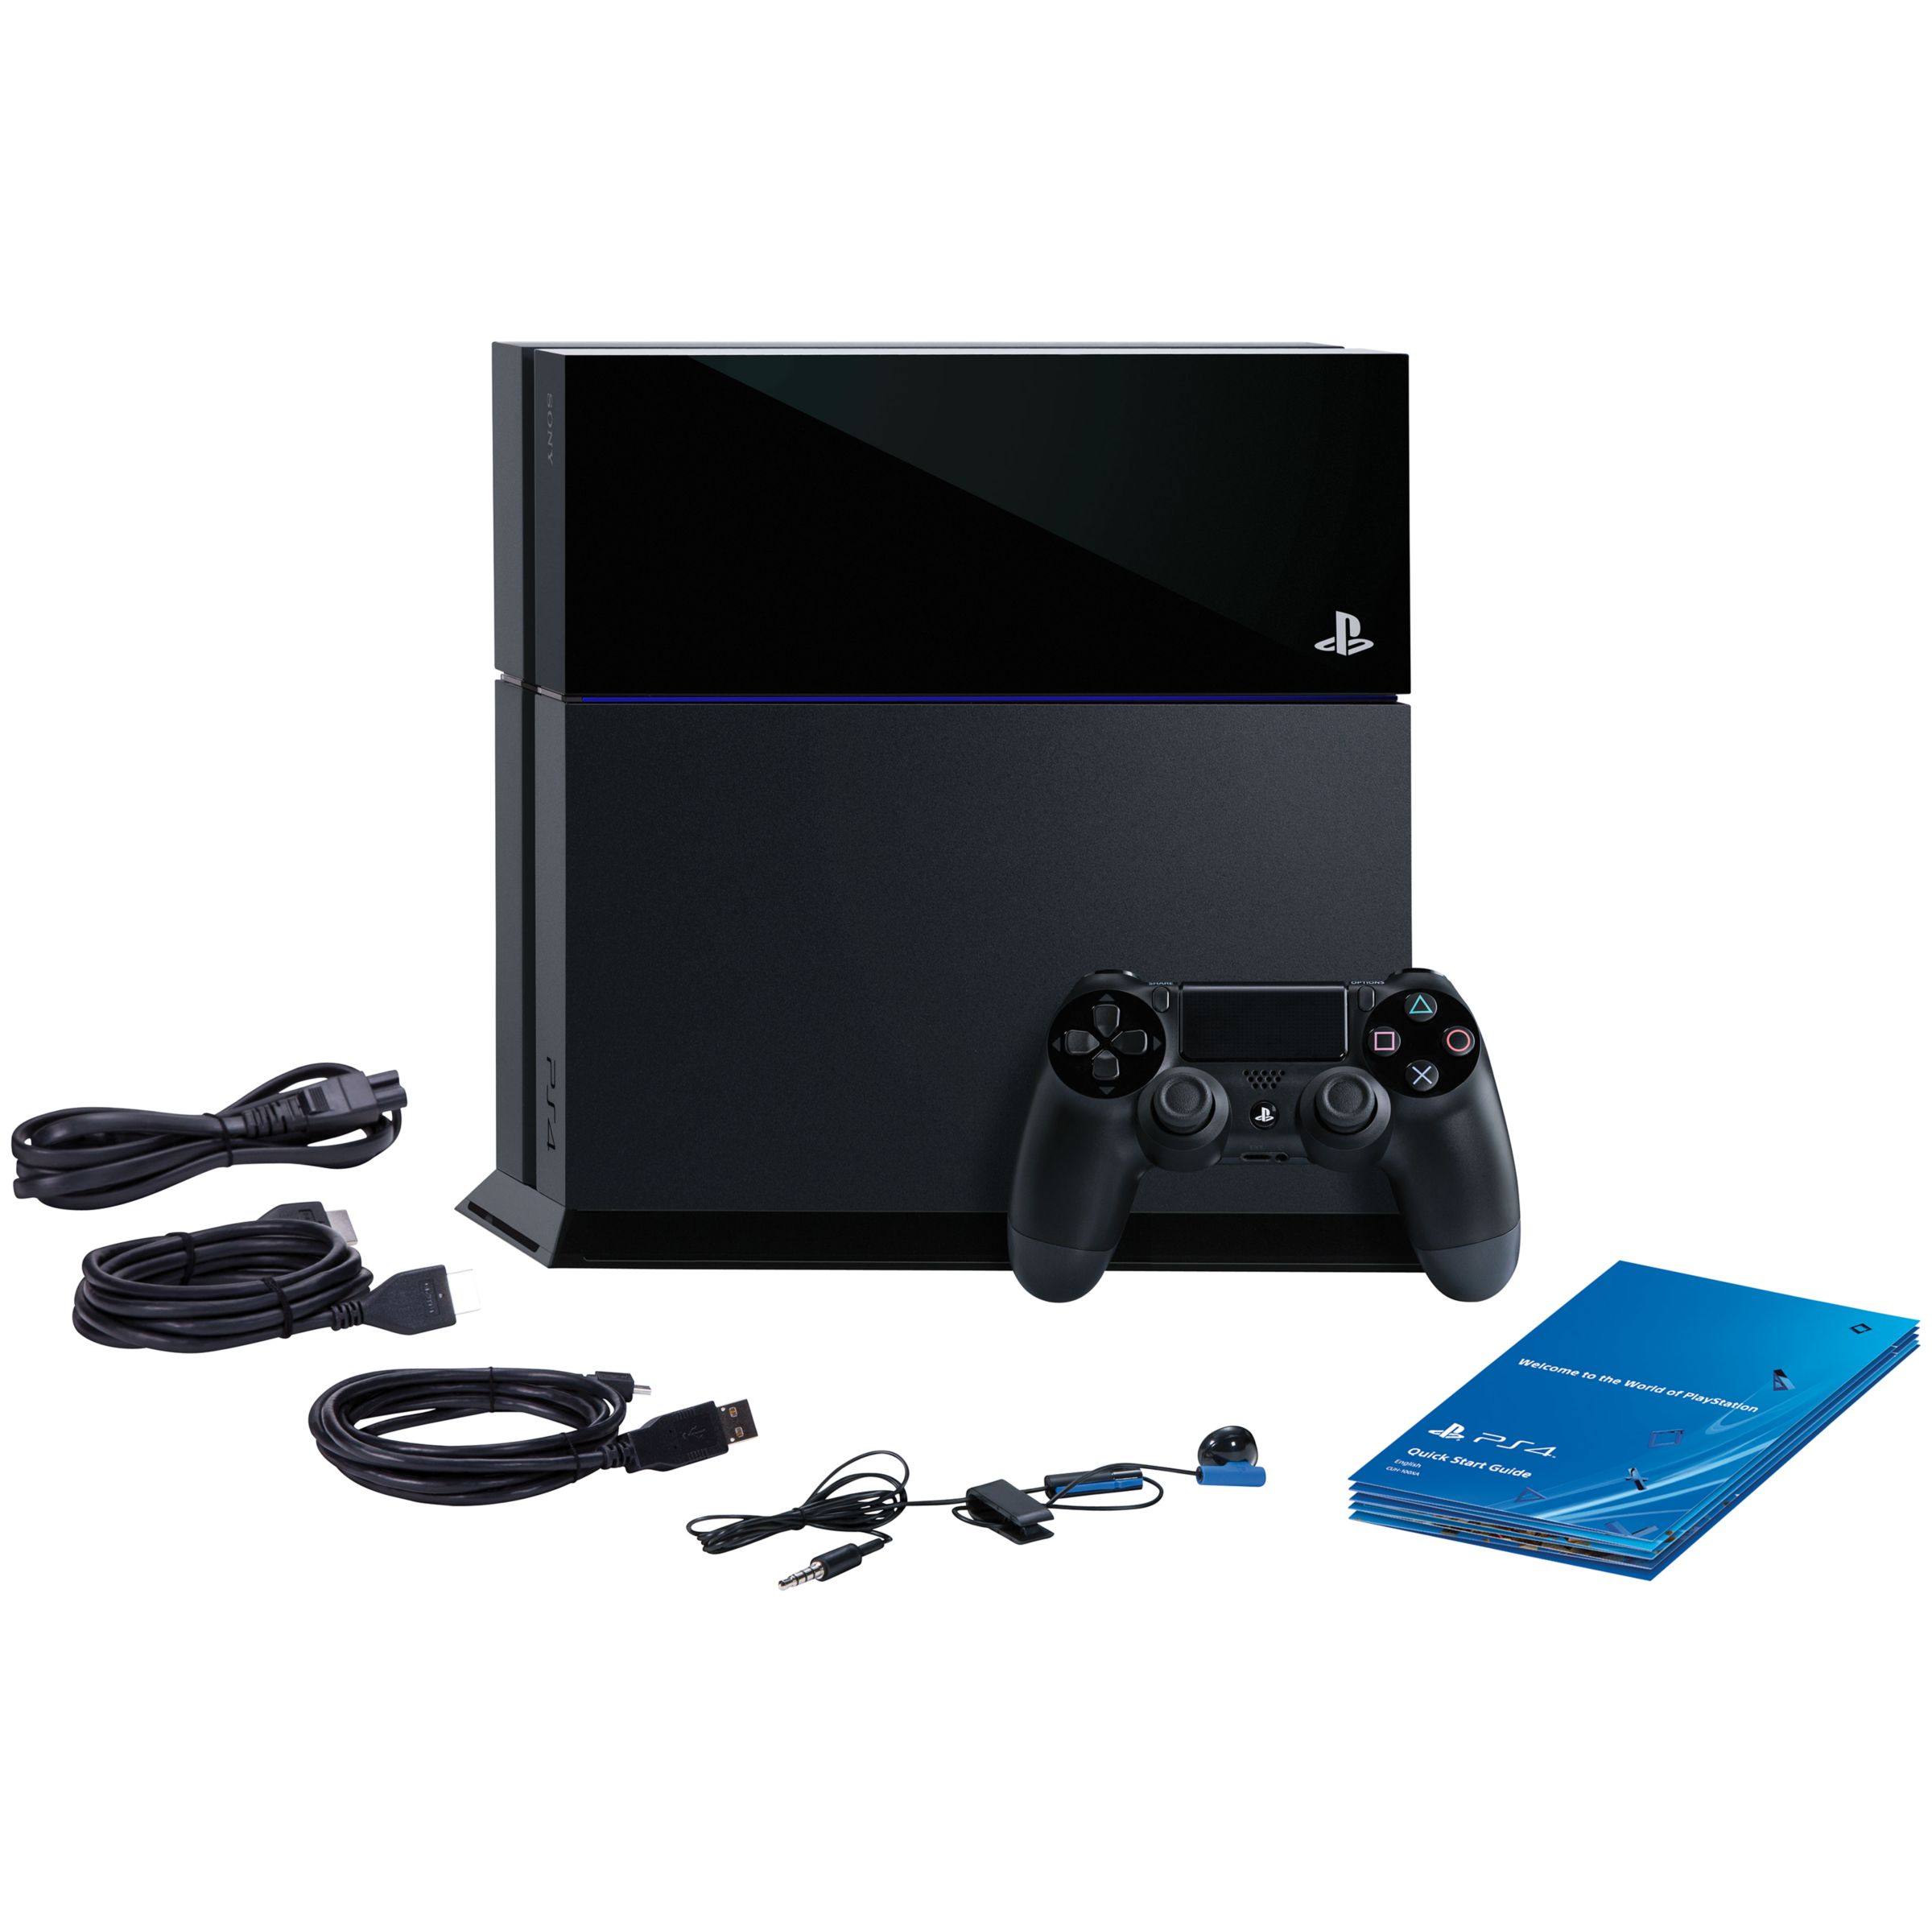 Buy Sony PlayStation 4 Console Online at johnlewis.com